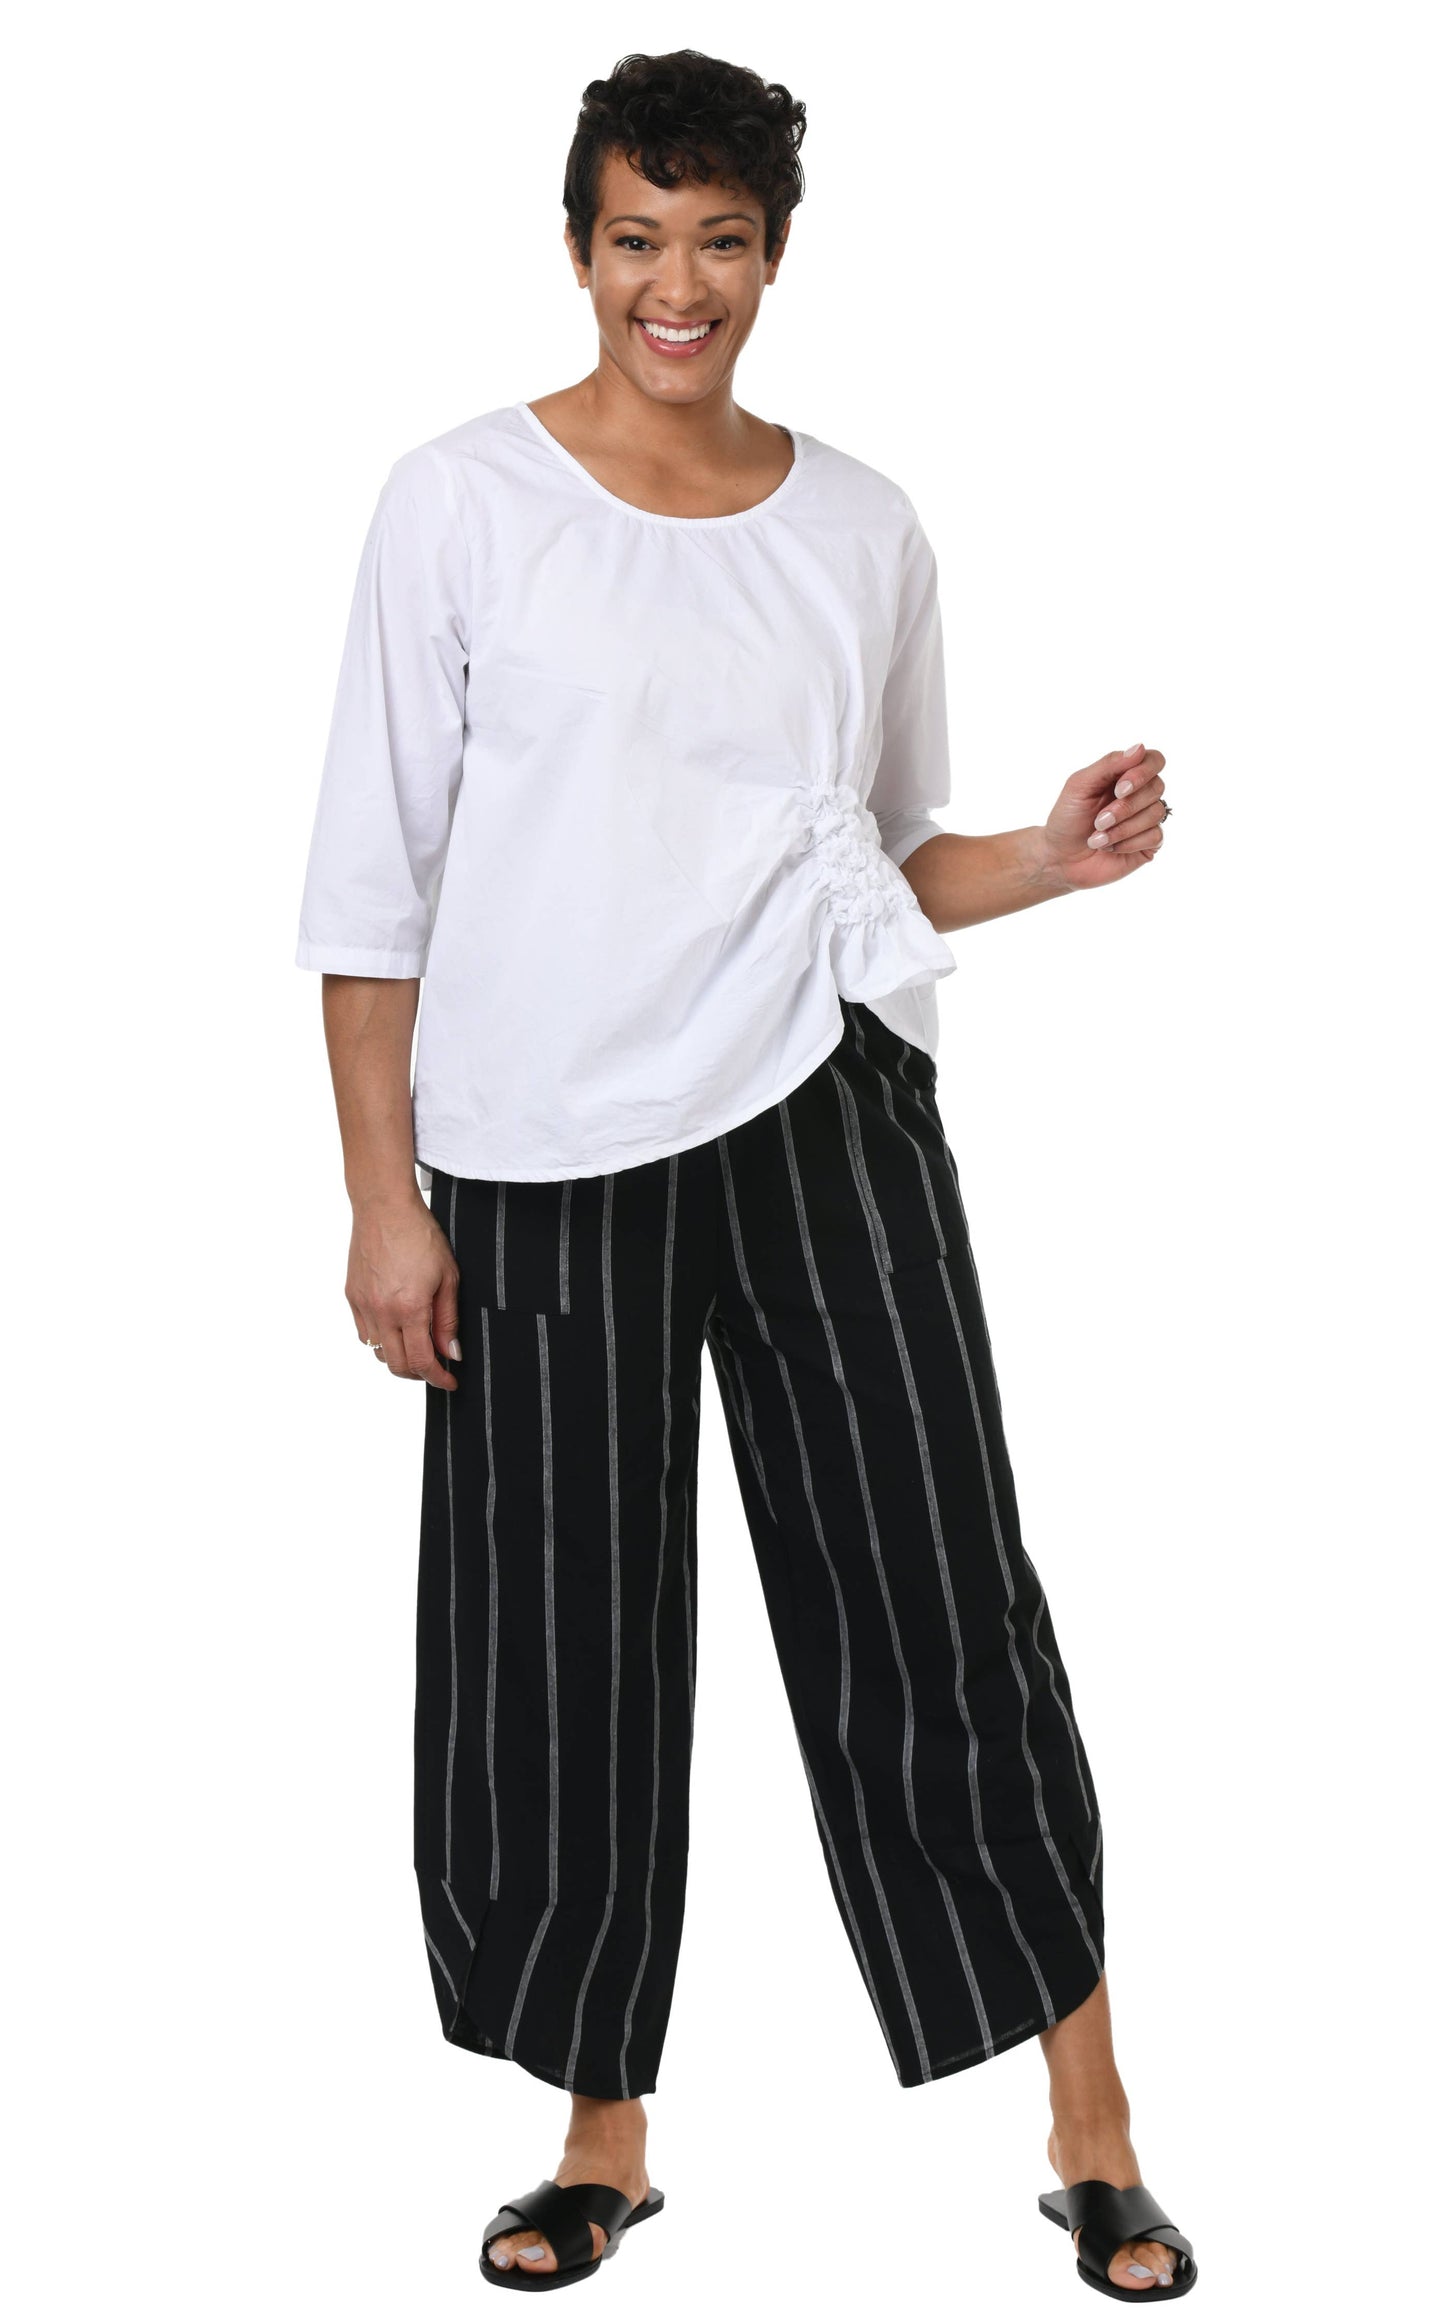 Tulip Clothing- Ariana Pant in Hinsdale Stripe